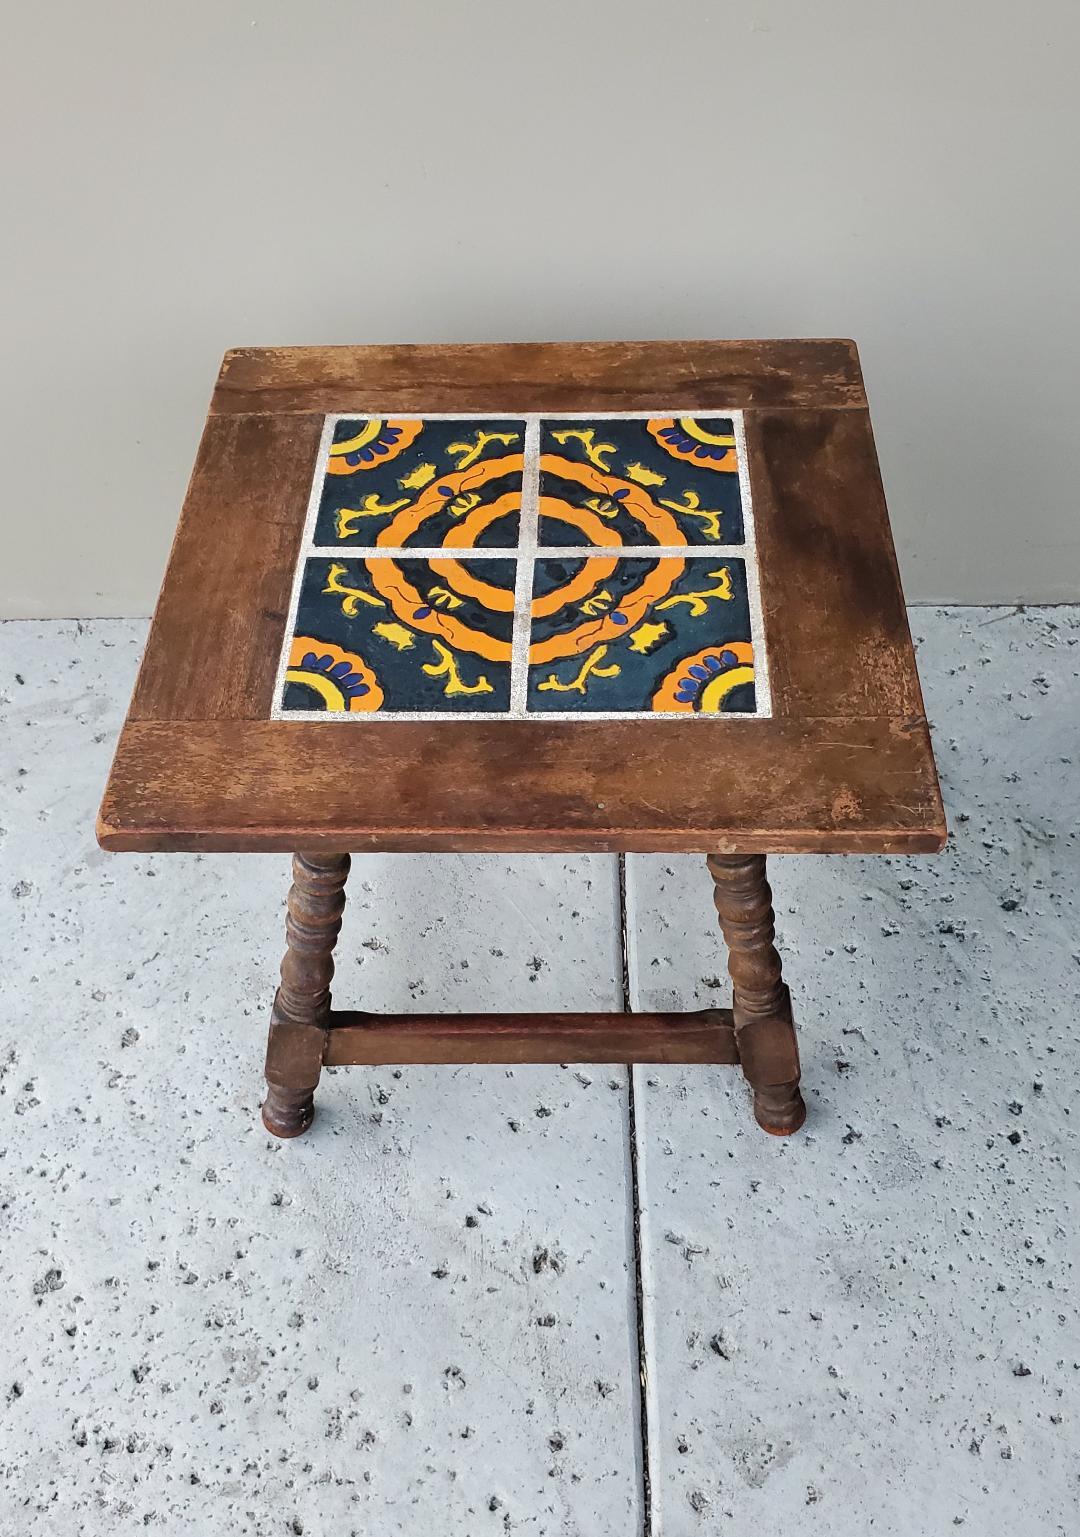 American Early 20th Century Catalina Tile Table Mission Craftsman Arts & Craft Spanish  For Sale